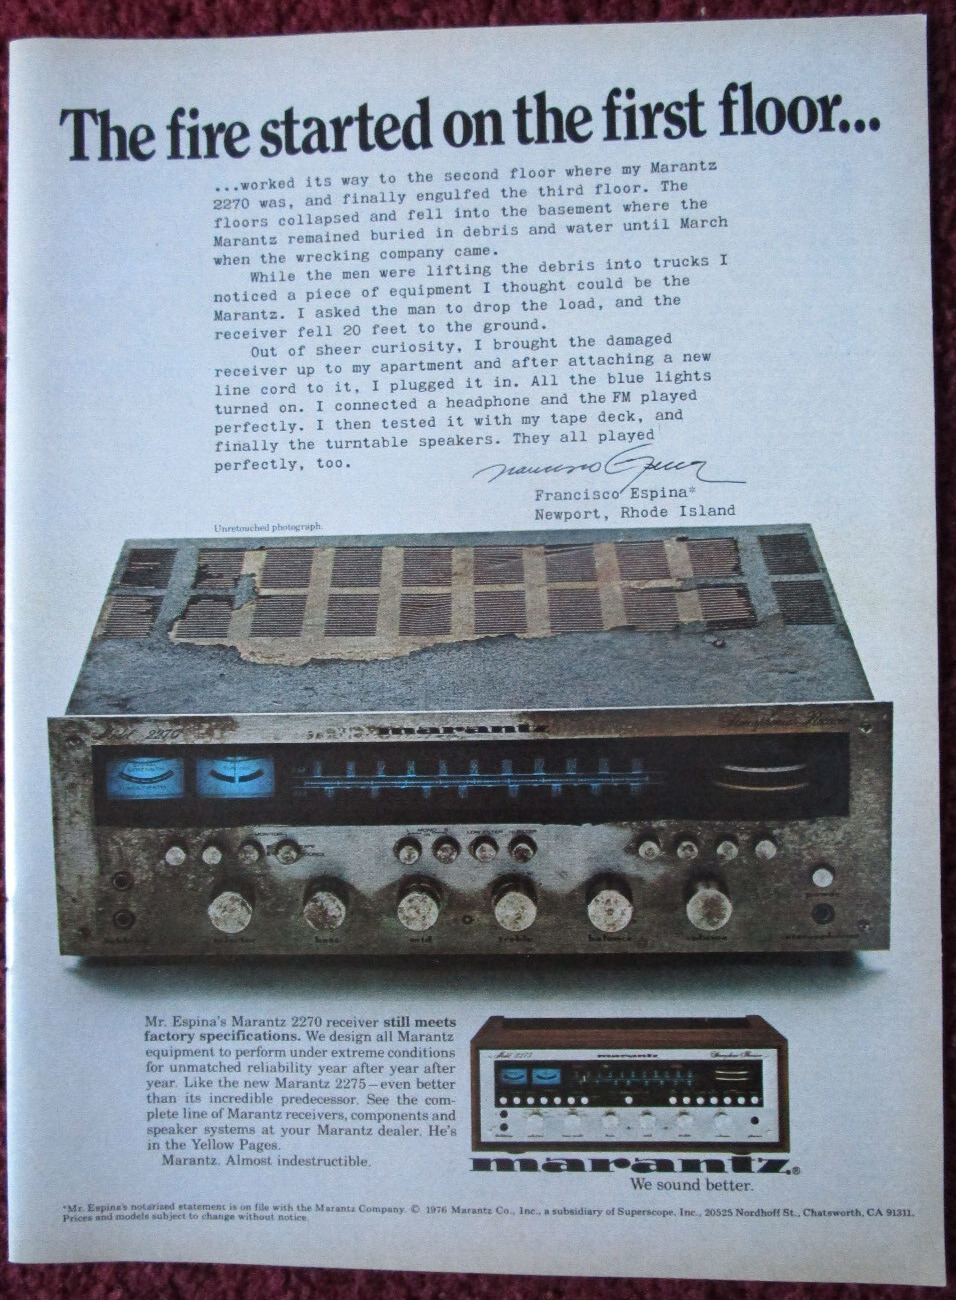 1976 MARANTZ Model 2270 Stereo Receiver Print Ad ~ Fire Started on First Floor